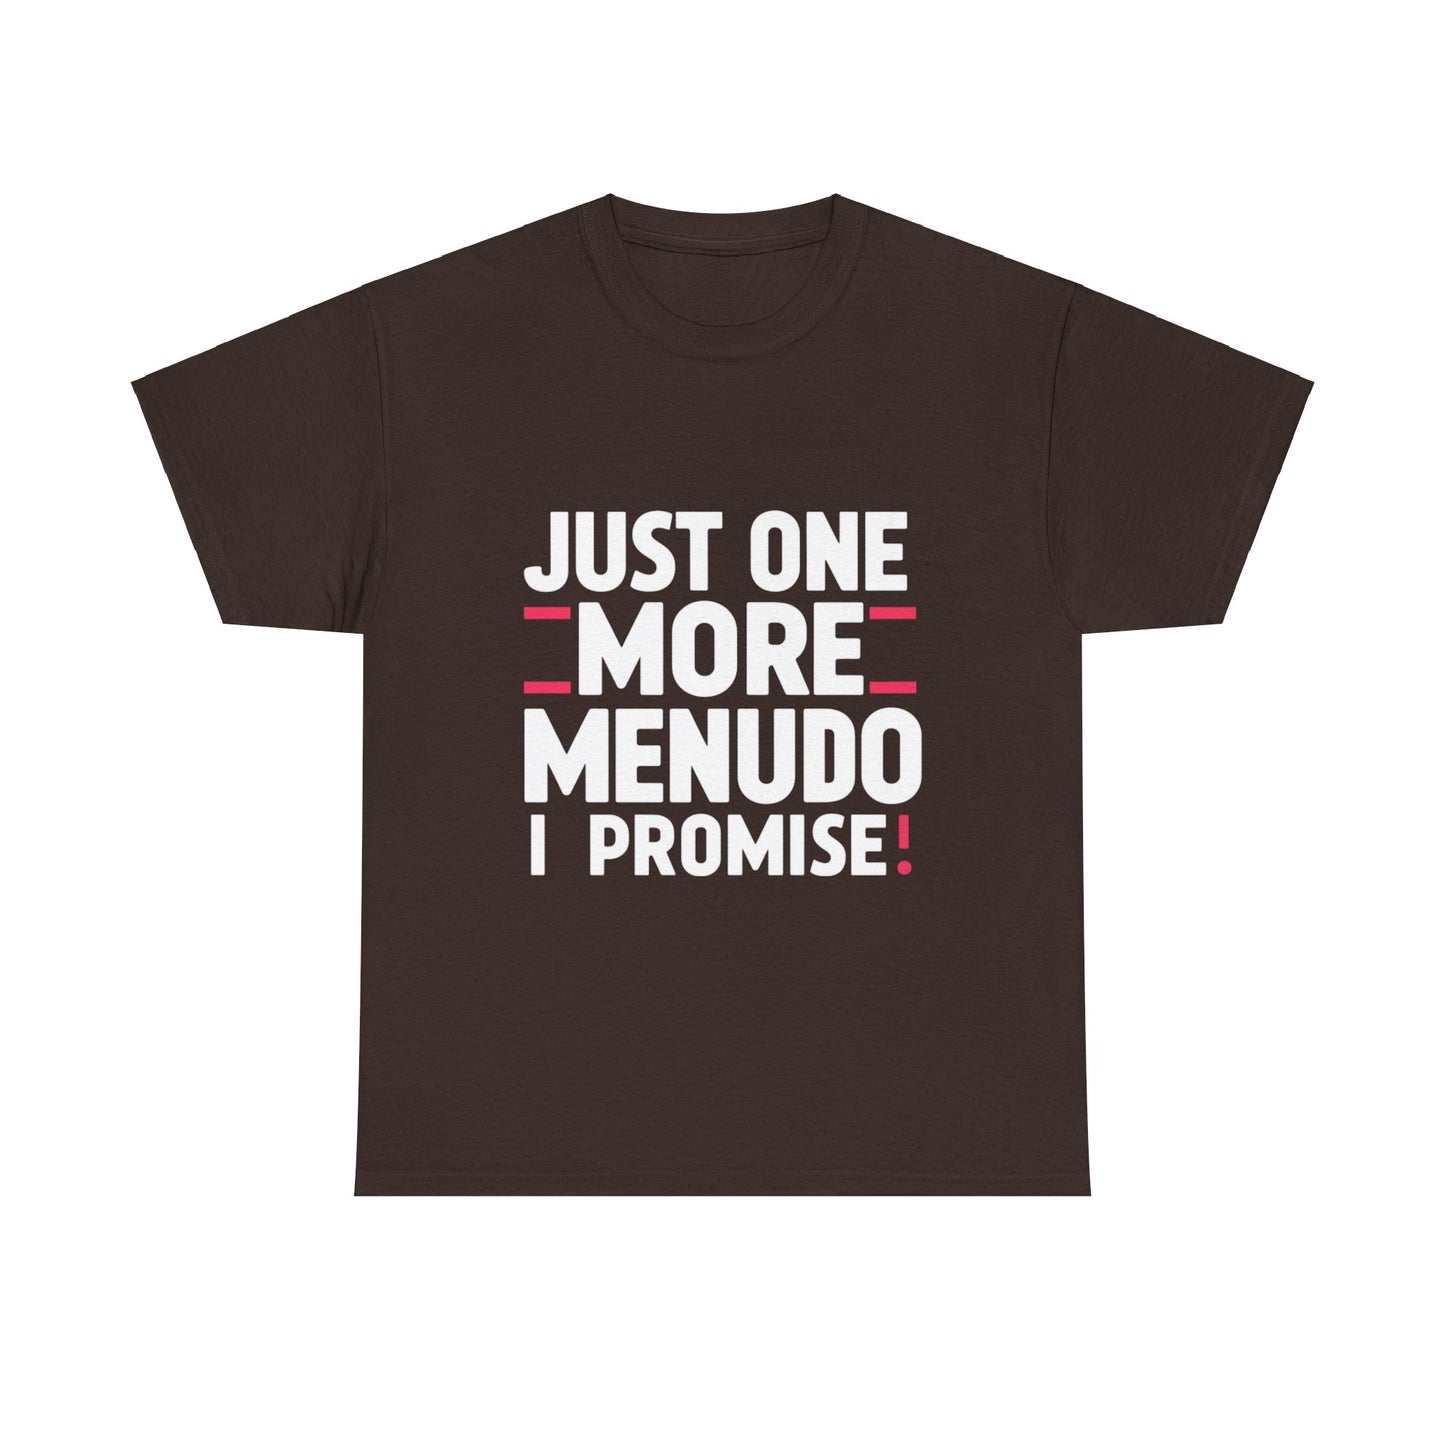 Just One More Menudo I Promise Mexican Food Graphic Unisex Heavy Cotton Tee Cotton Funny Humorous Graphic Soft Premium Unisex Men Women Dark Chocolate T-shirt Birthday Gift-3